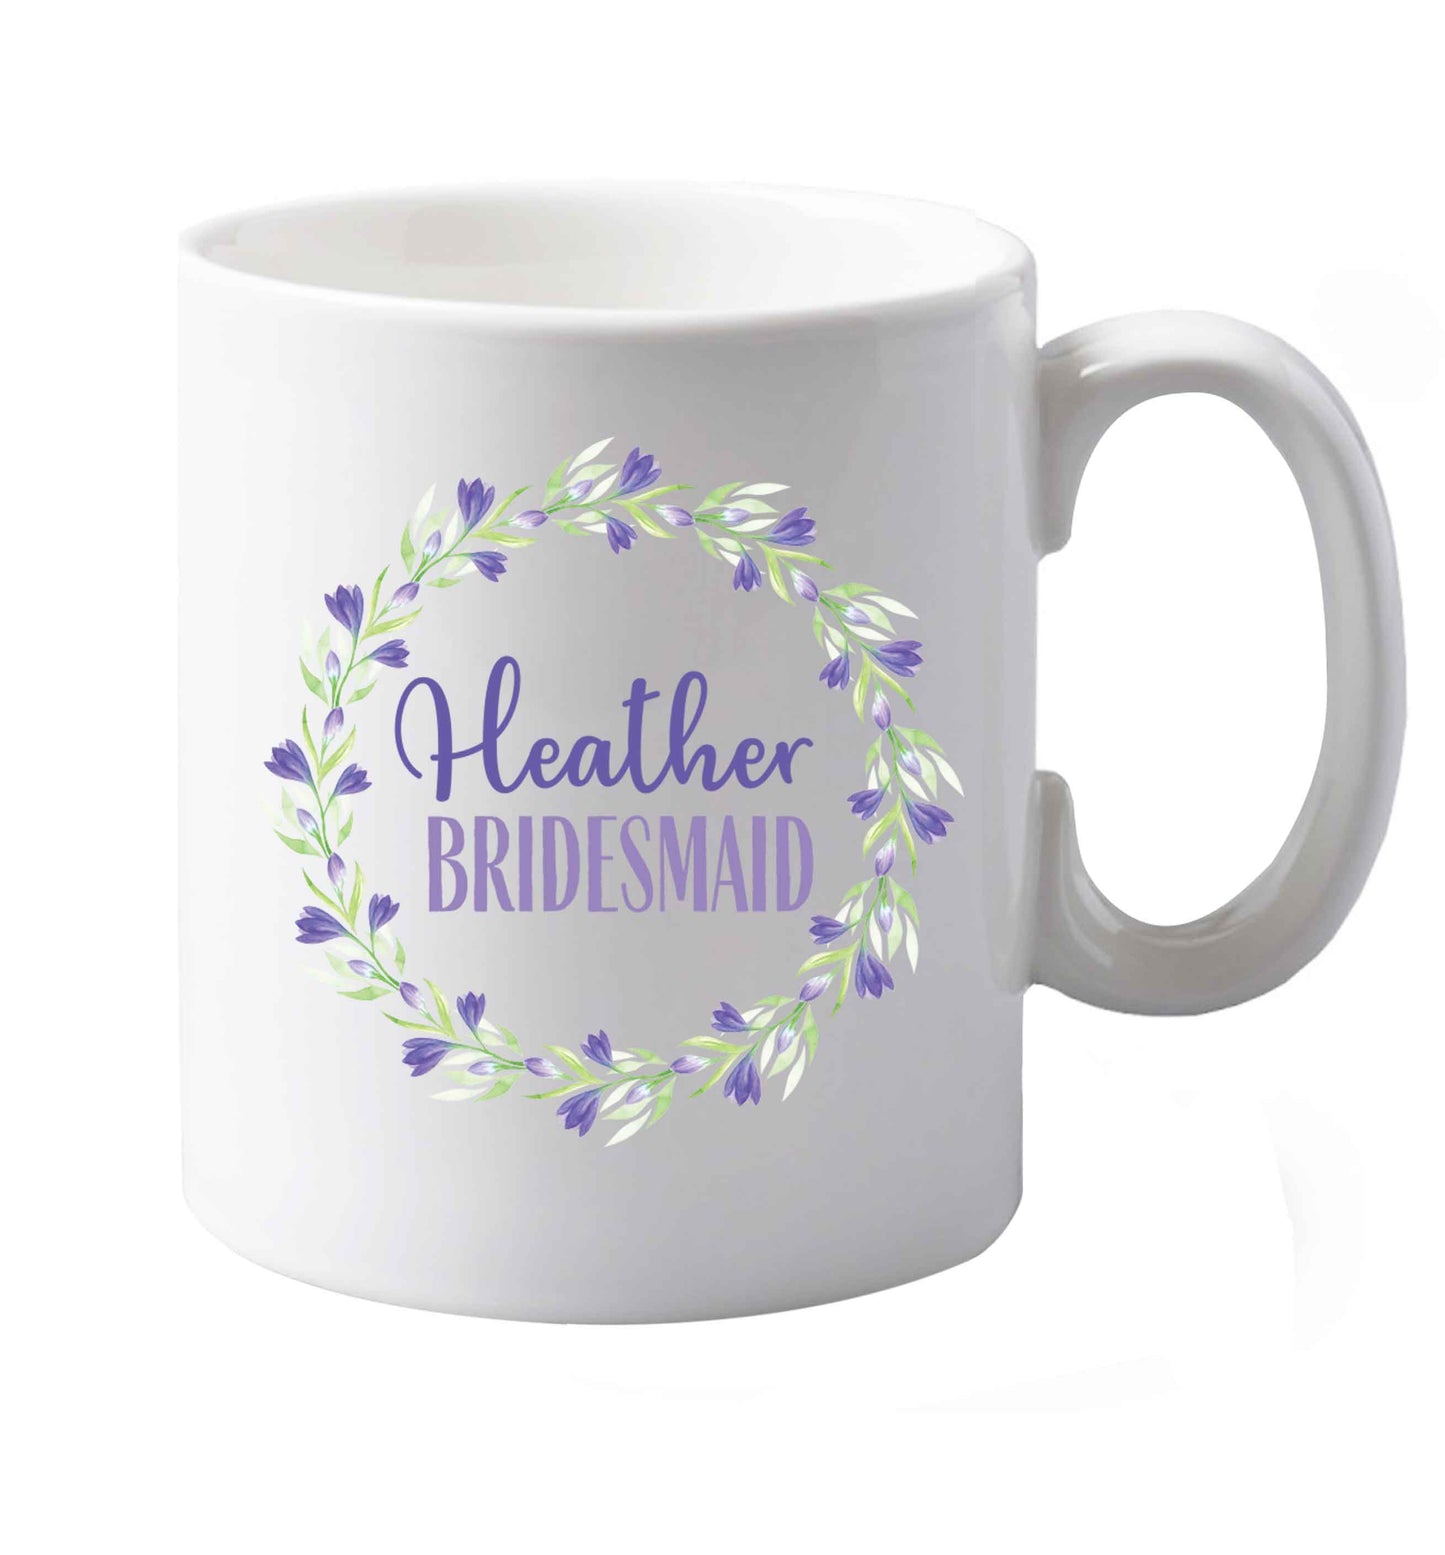 10 oz Perfect wedding guest favours or hen party gifts! Personalised bridal floral wreath designs, any name, any role!   ceramic mug both sides